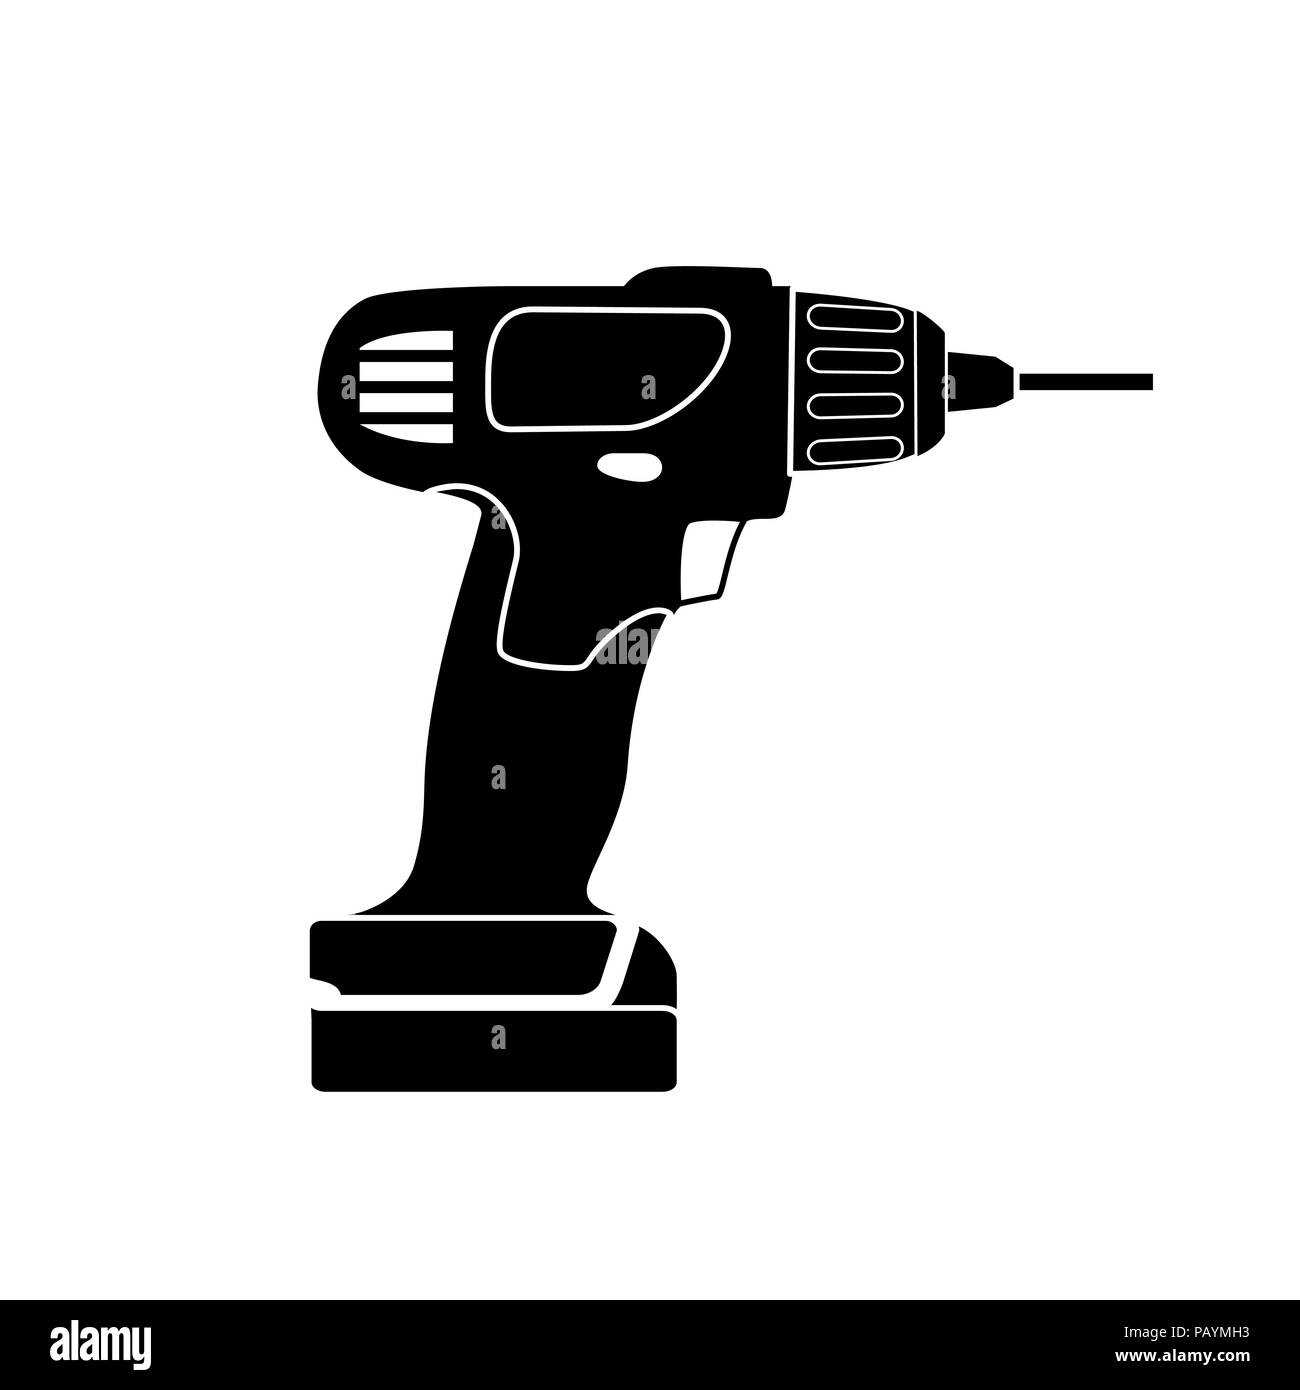 Screw Gun Icon. Impact wrench or screwgun vector. Electric screwdriver symbol. Blank and white Stock Vector